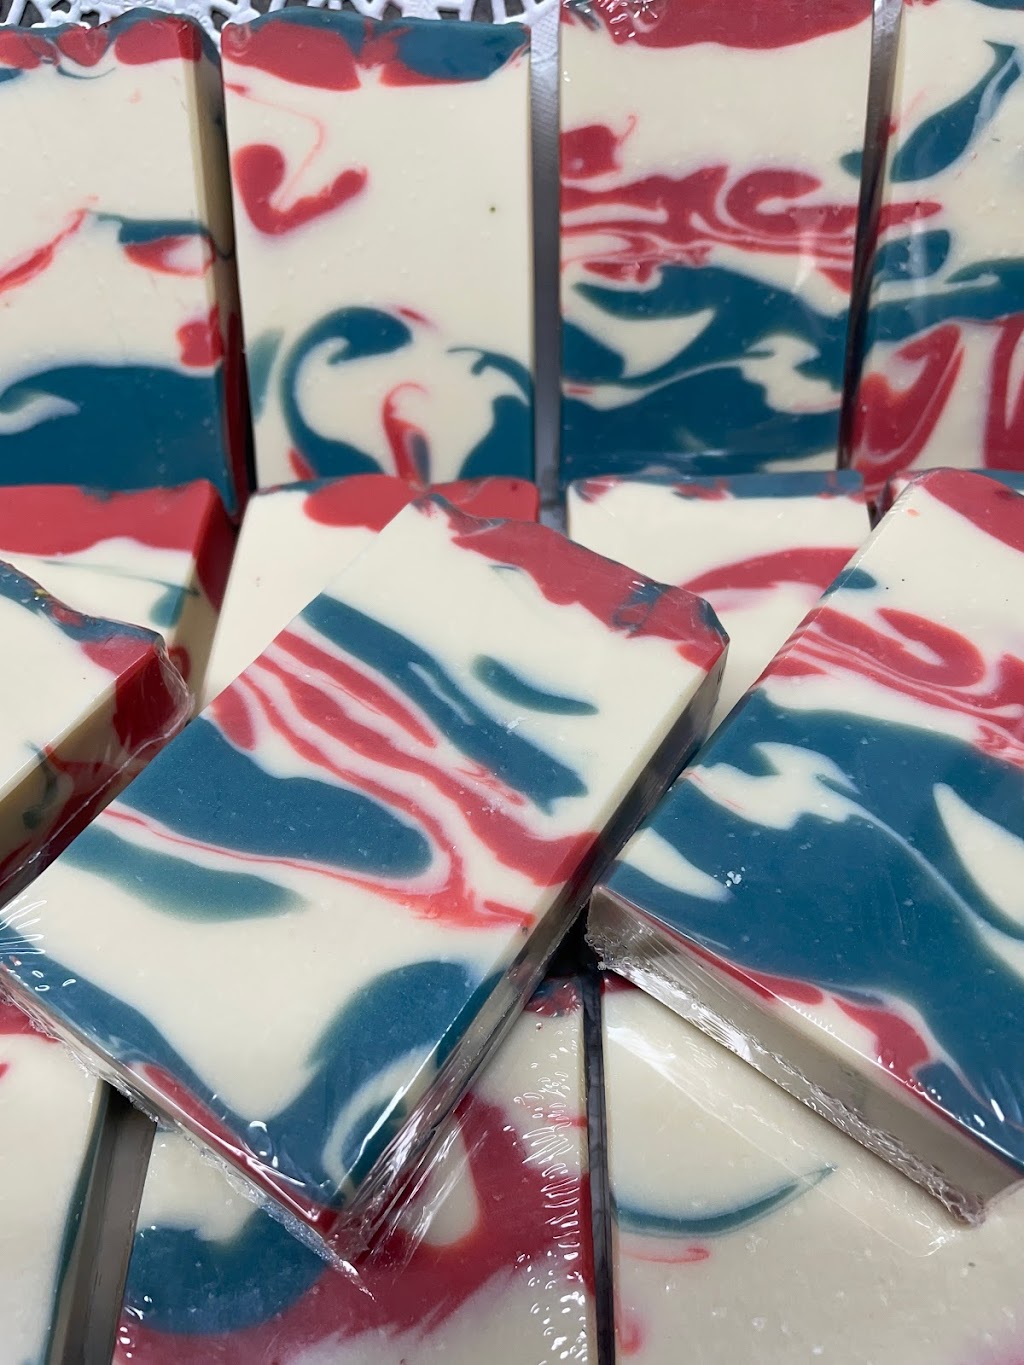 Swan Soap and Such | 251 Shady Brook Ln, Springfield, MA 01118 | Phone: (413) 367-4381